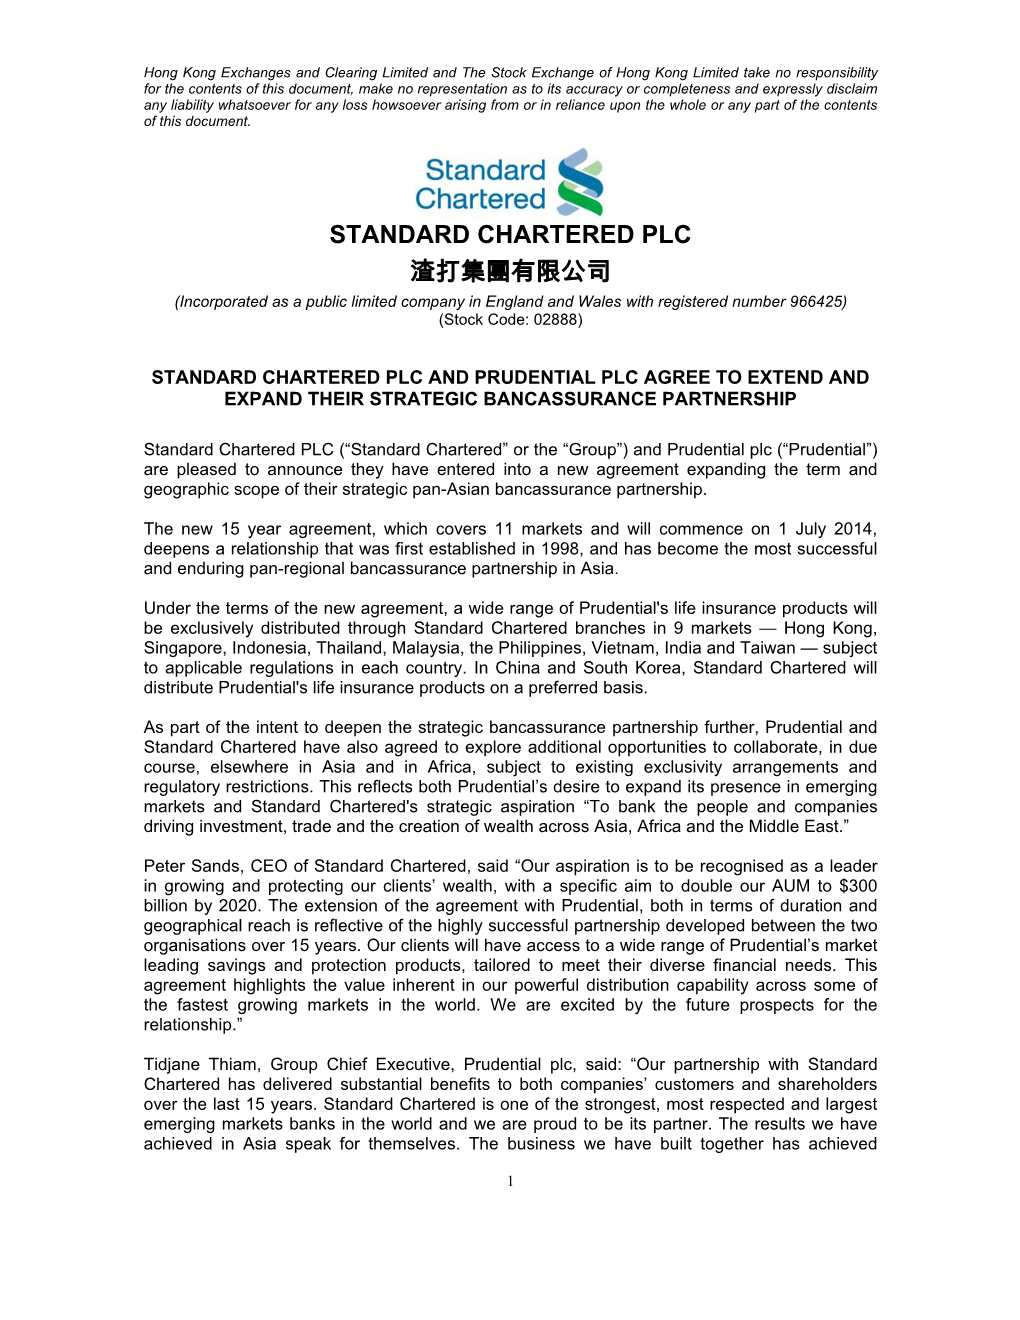 STANDARD CHARTERED PLC 渣打集團有限公司 (Incorporated As a Public Limited Company in England and Wales with Registered Number 966425) (Stock Code: 02888)